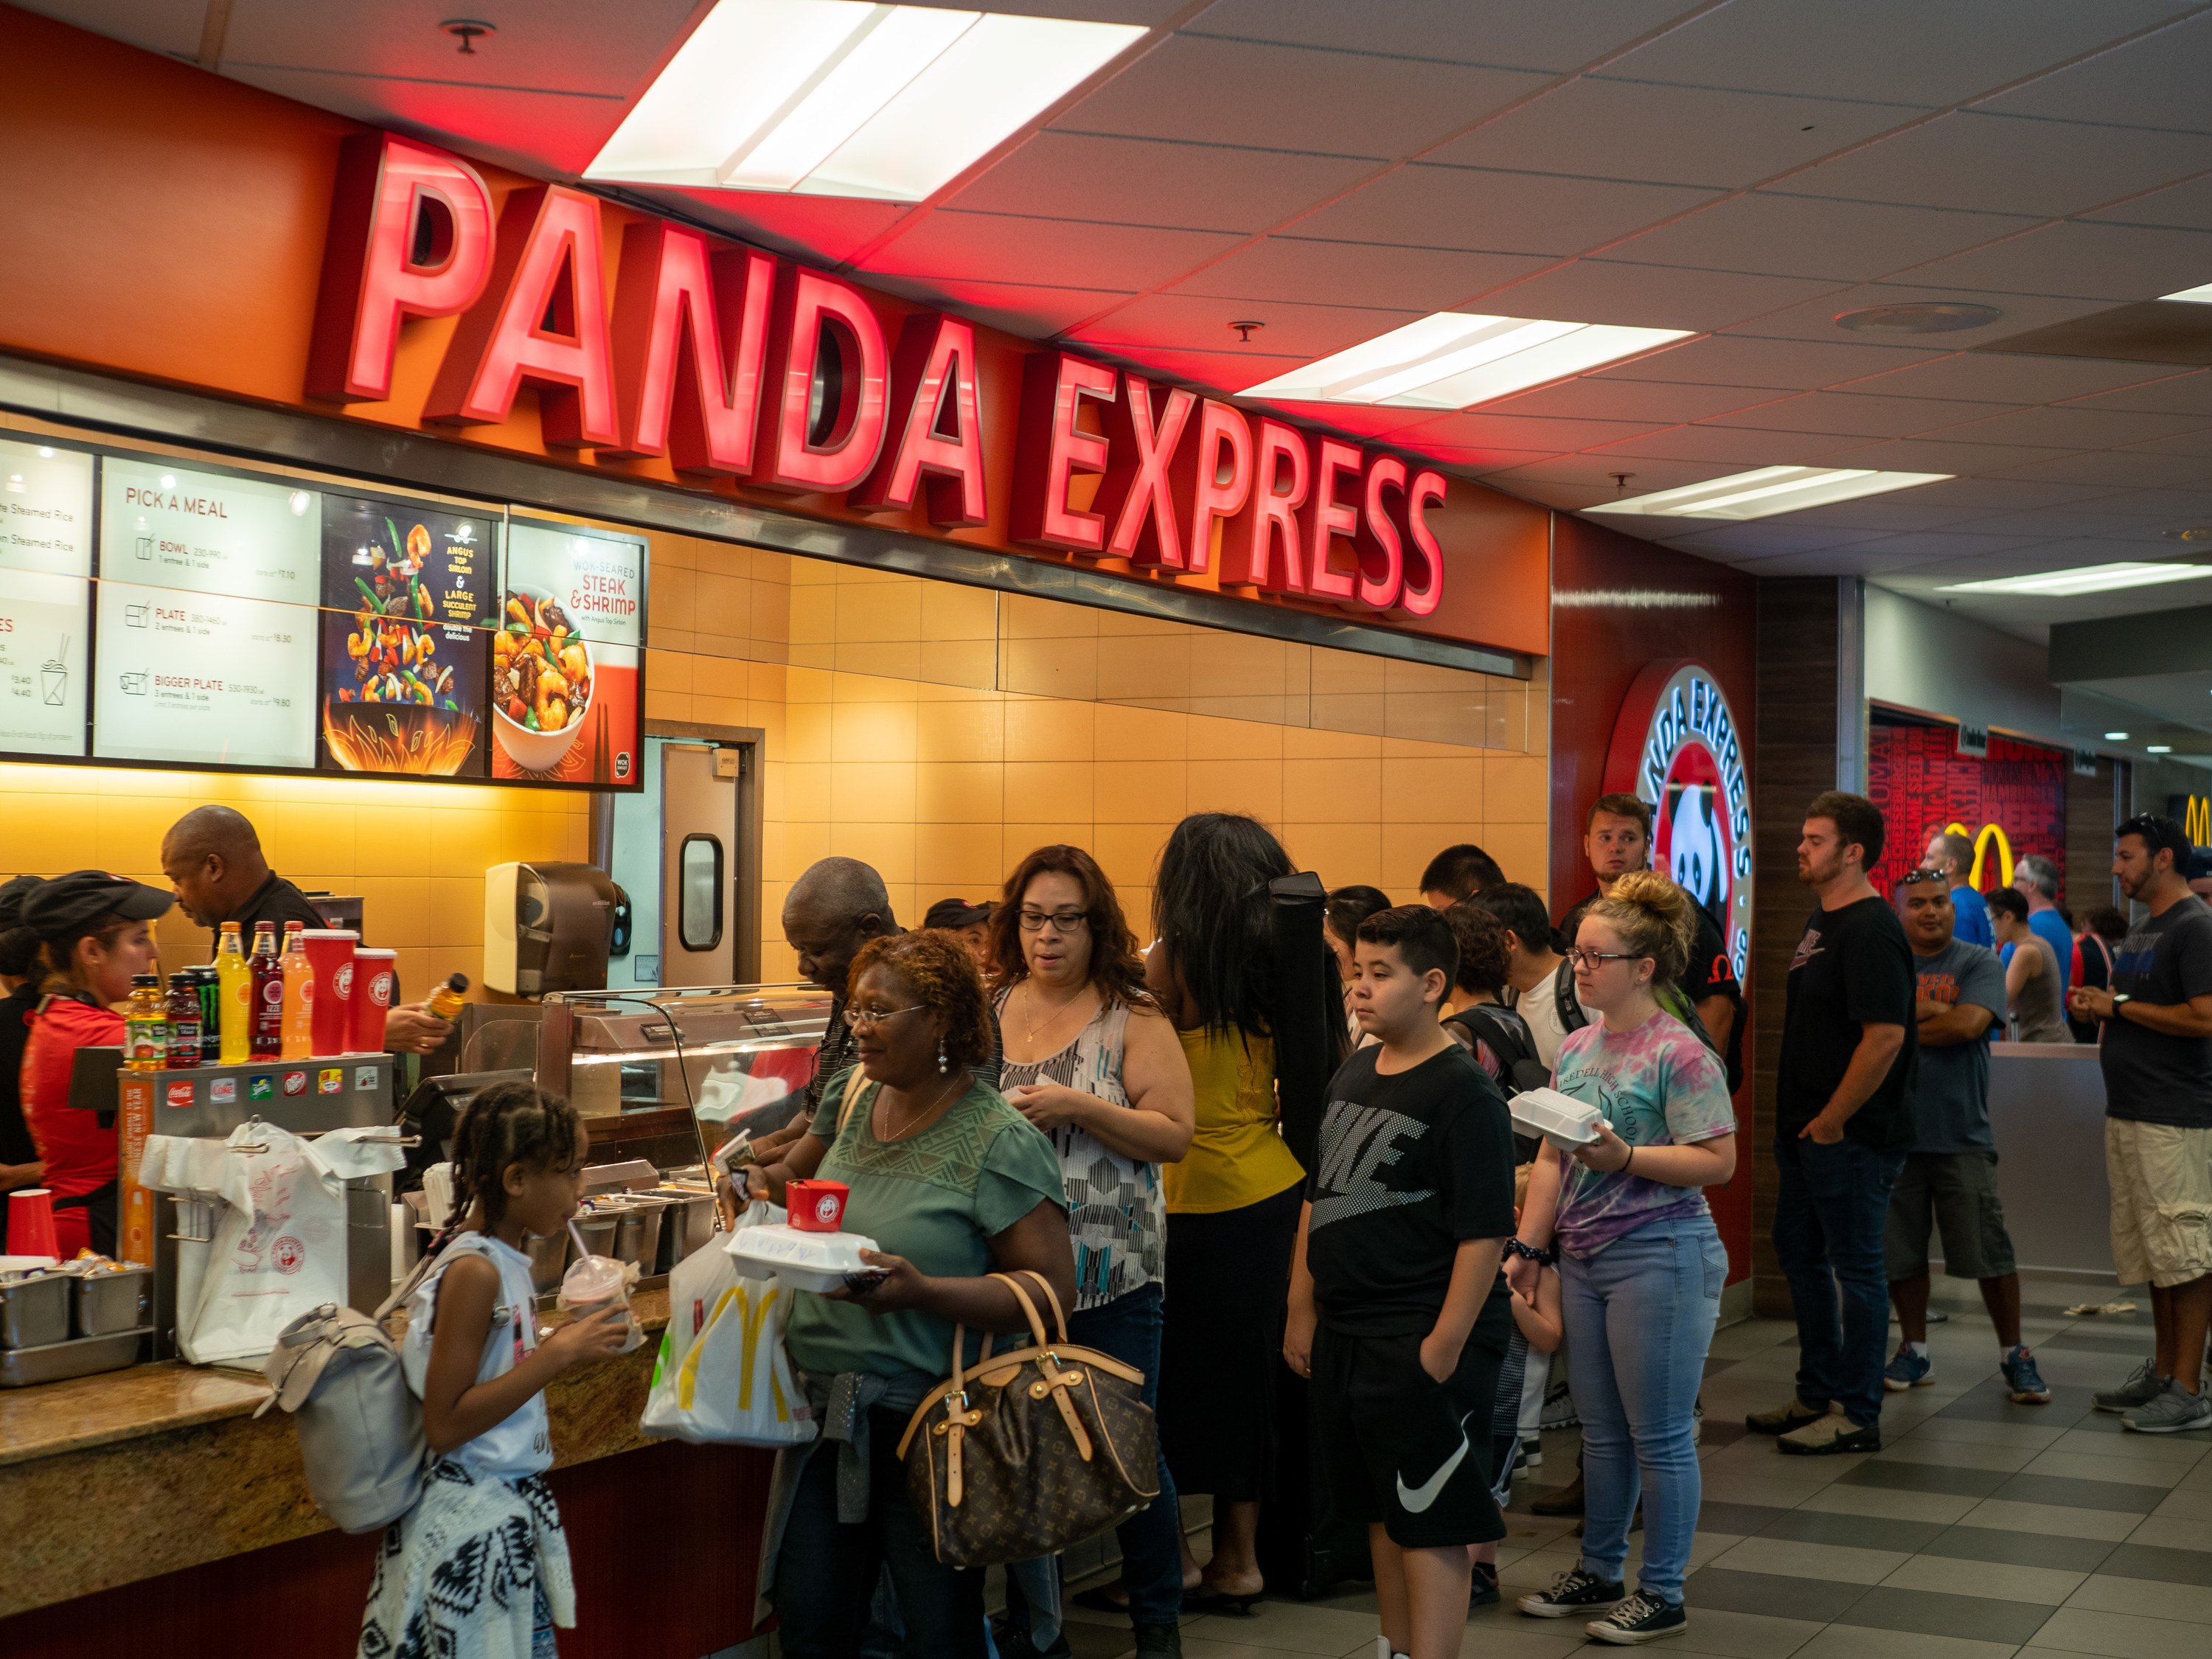 A group of people in line at Panda Express